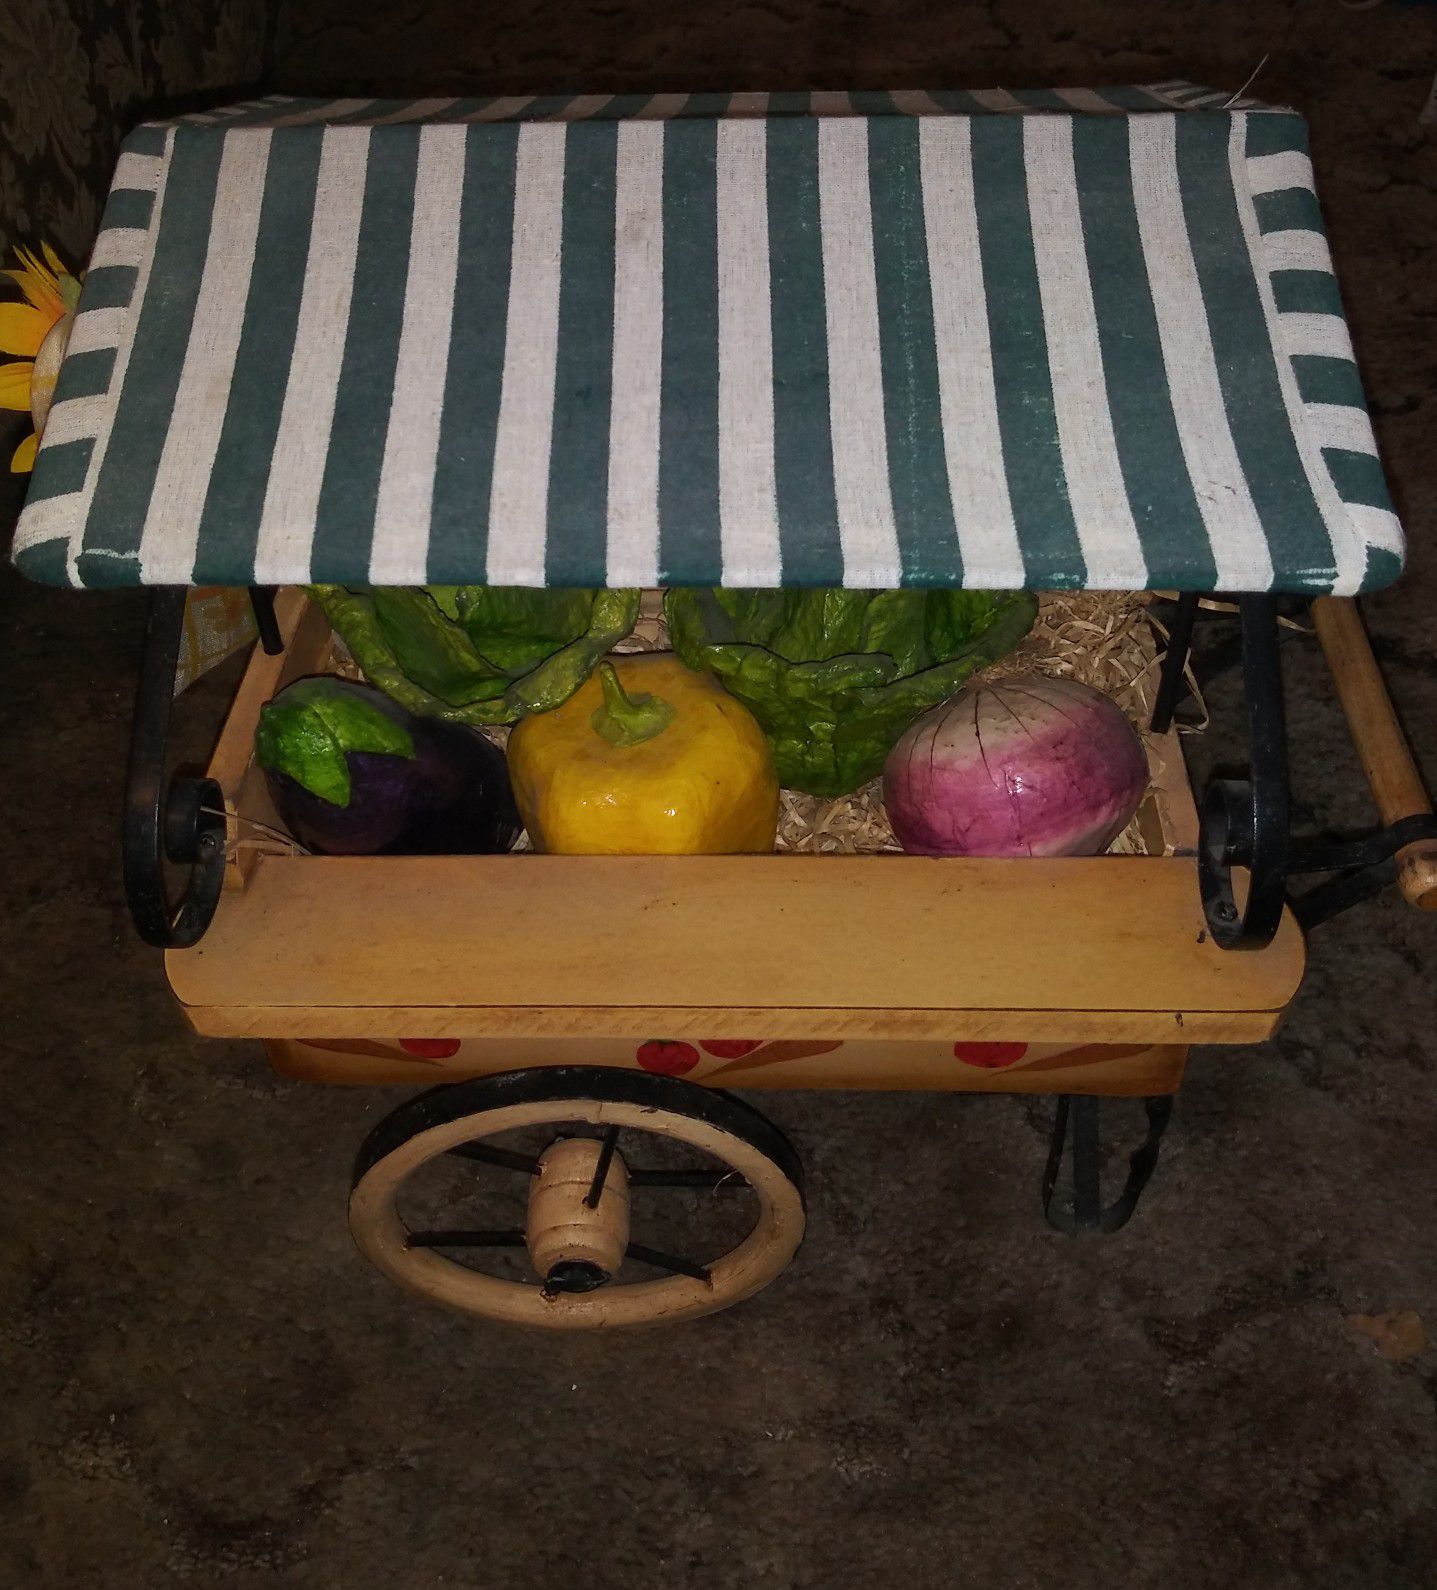 Rare Beautiful Old Fashioned Vegetable Wagon with Canopy Top